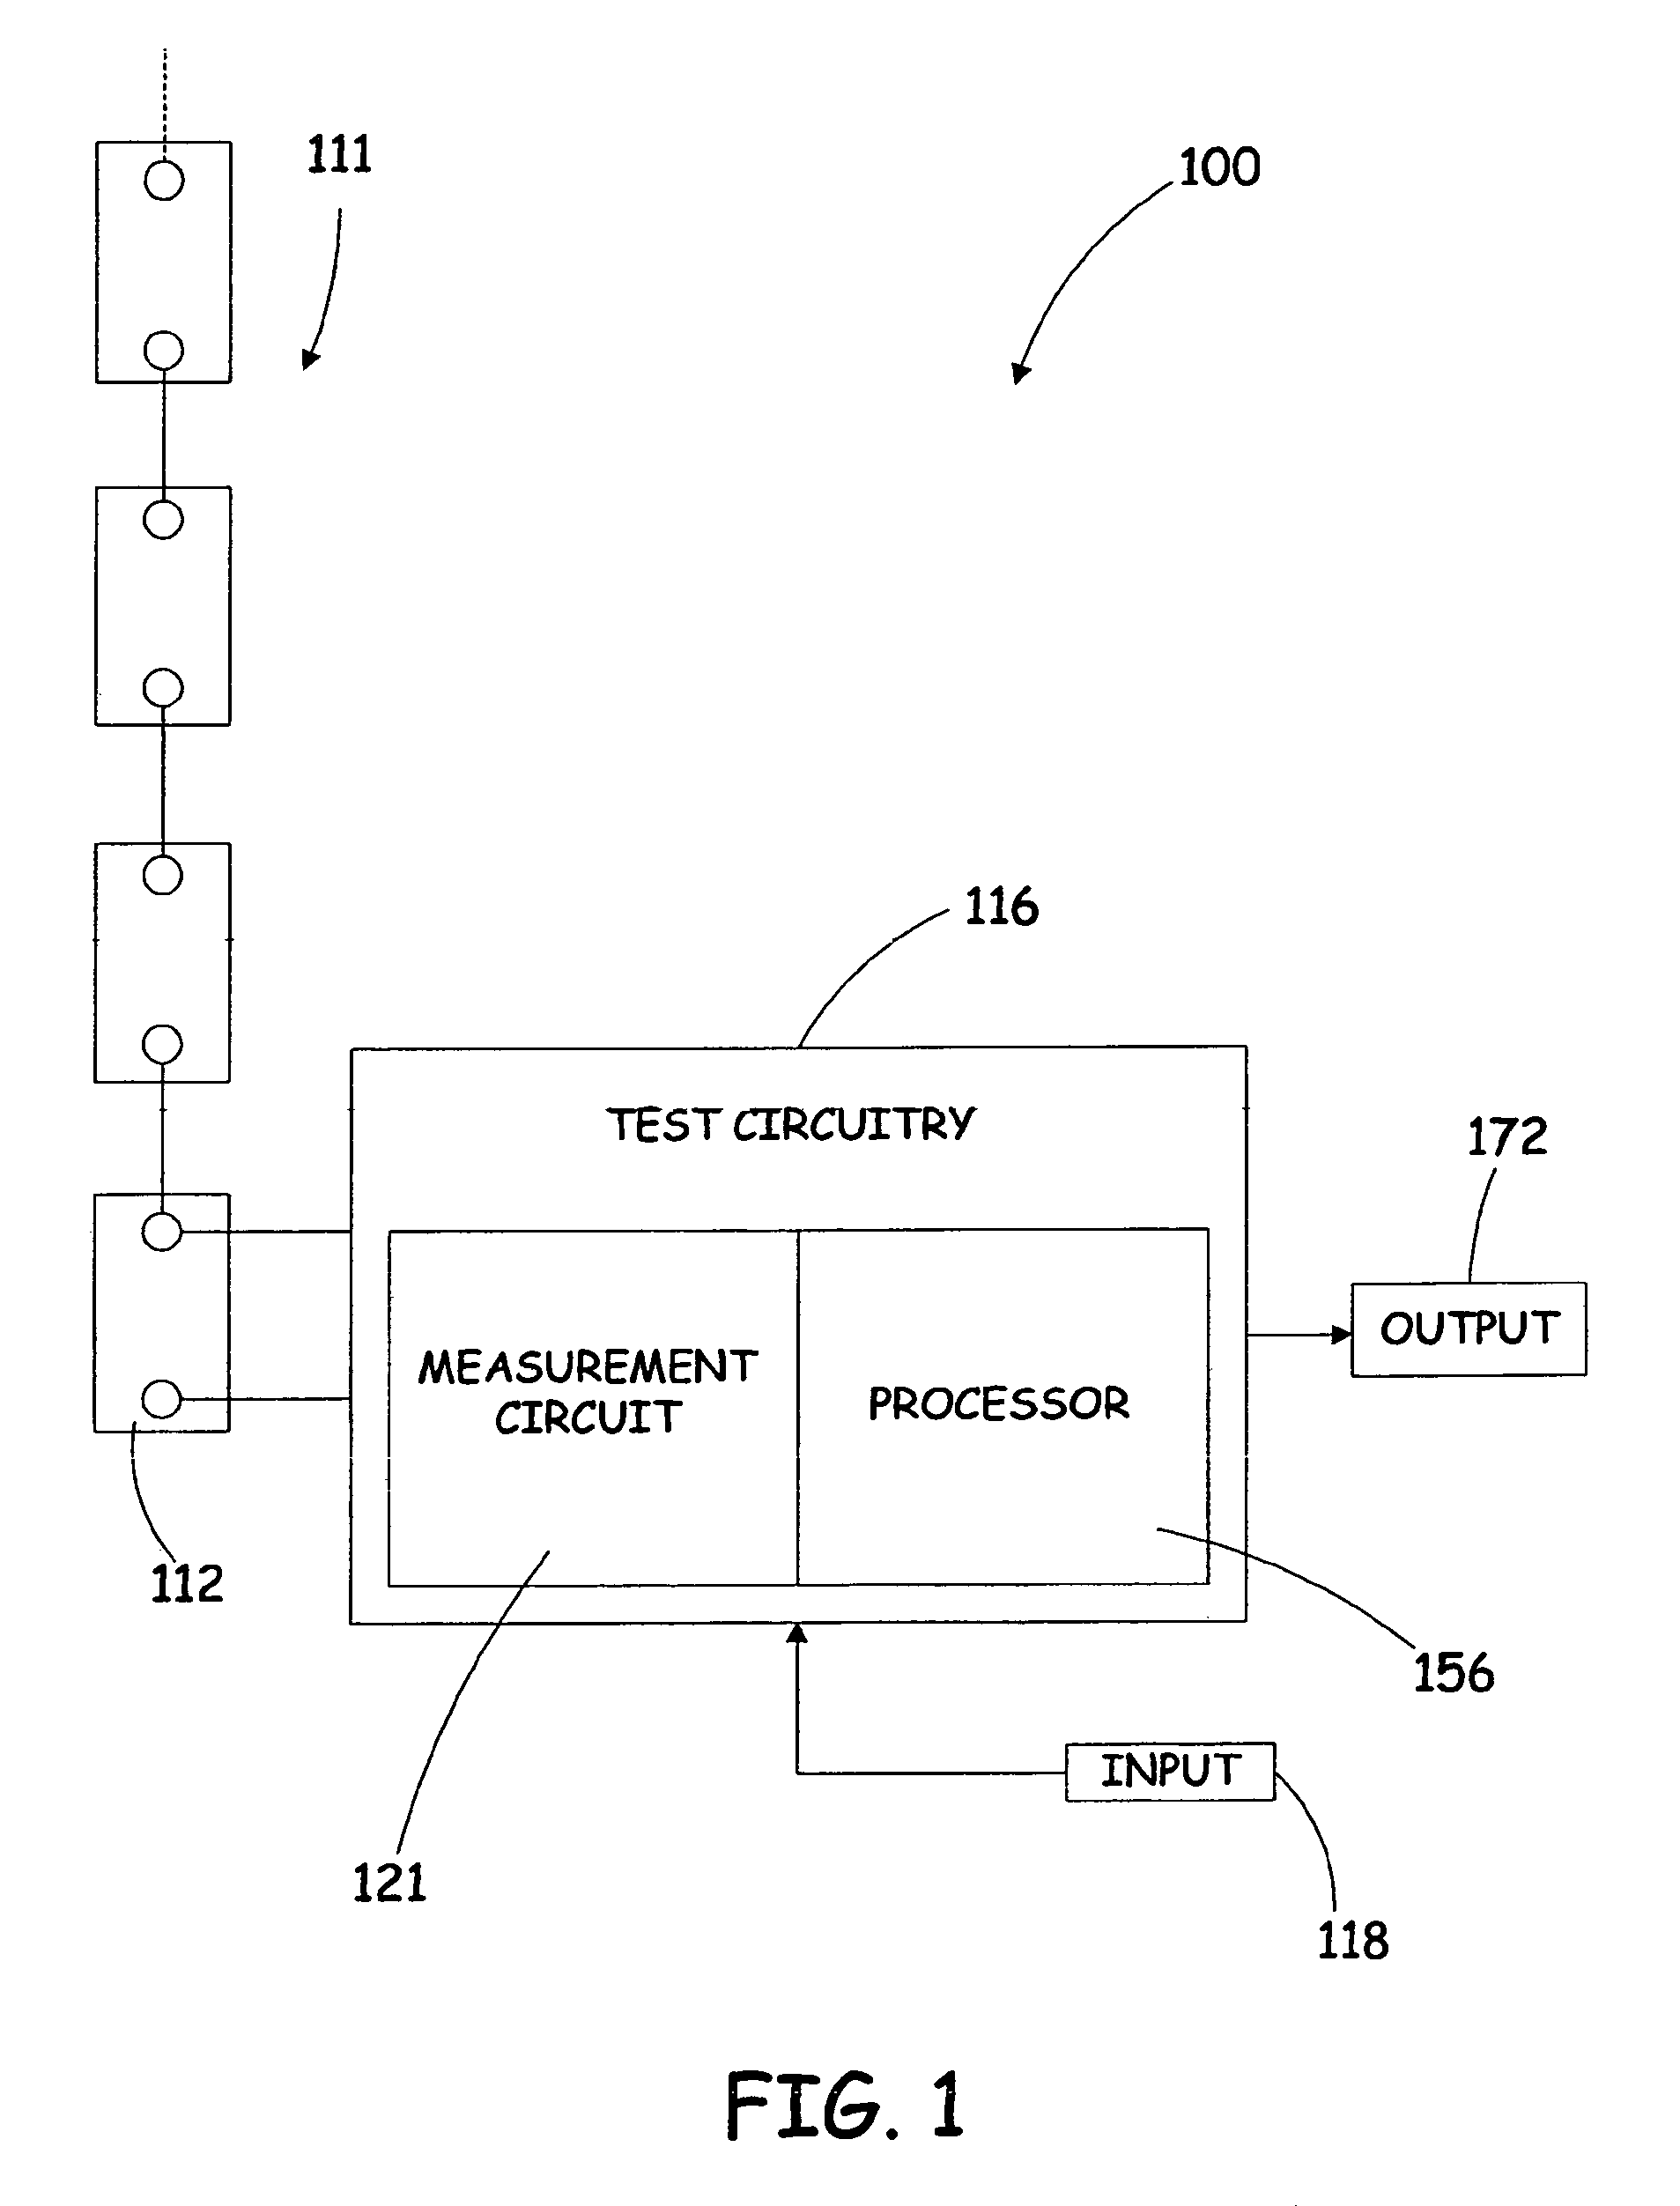 Battery tester that calculates its own reference values